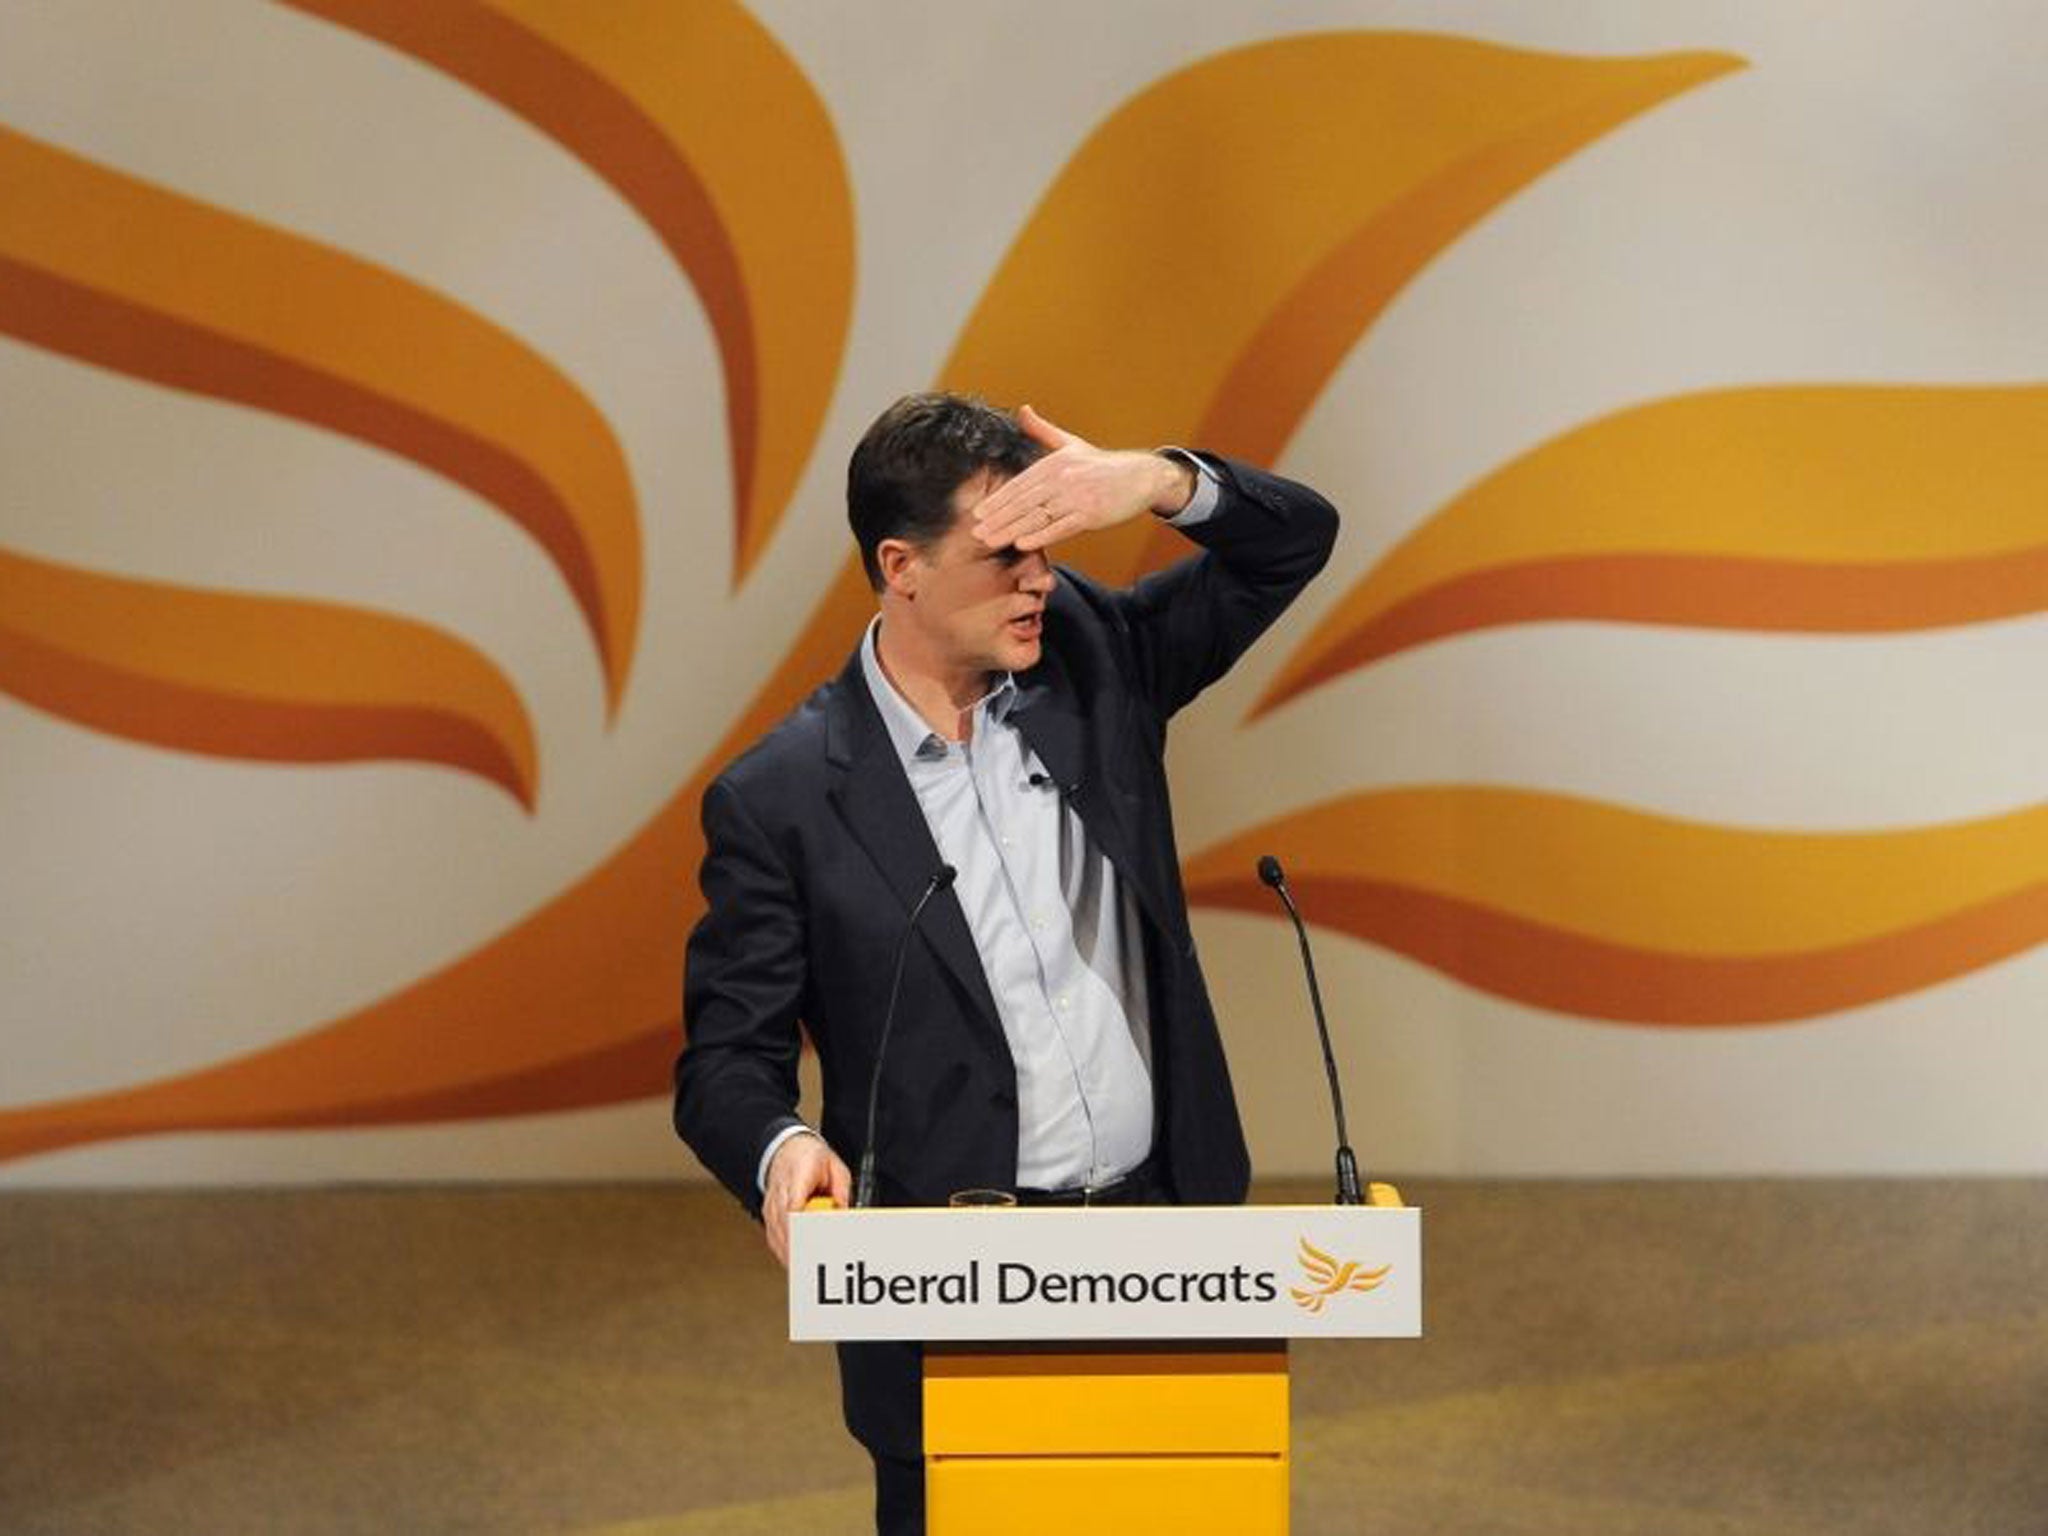 Nick Clegg will criticise the ‘ungenerous, backward-looking politics’ that has emerged in Britain